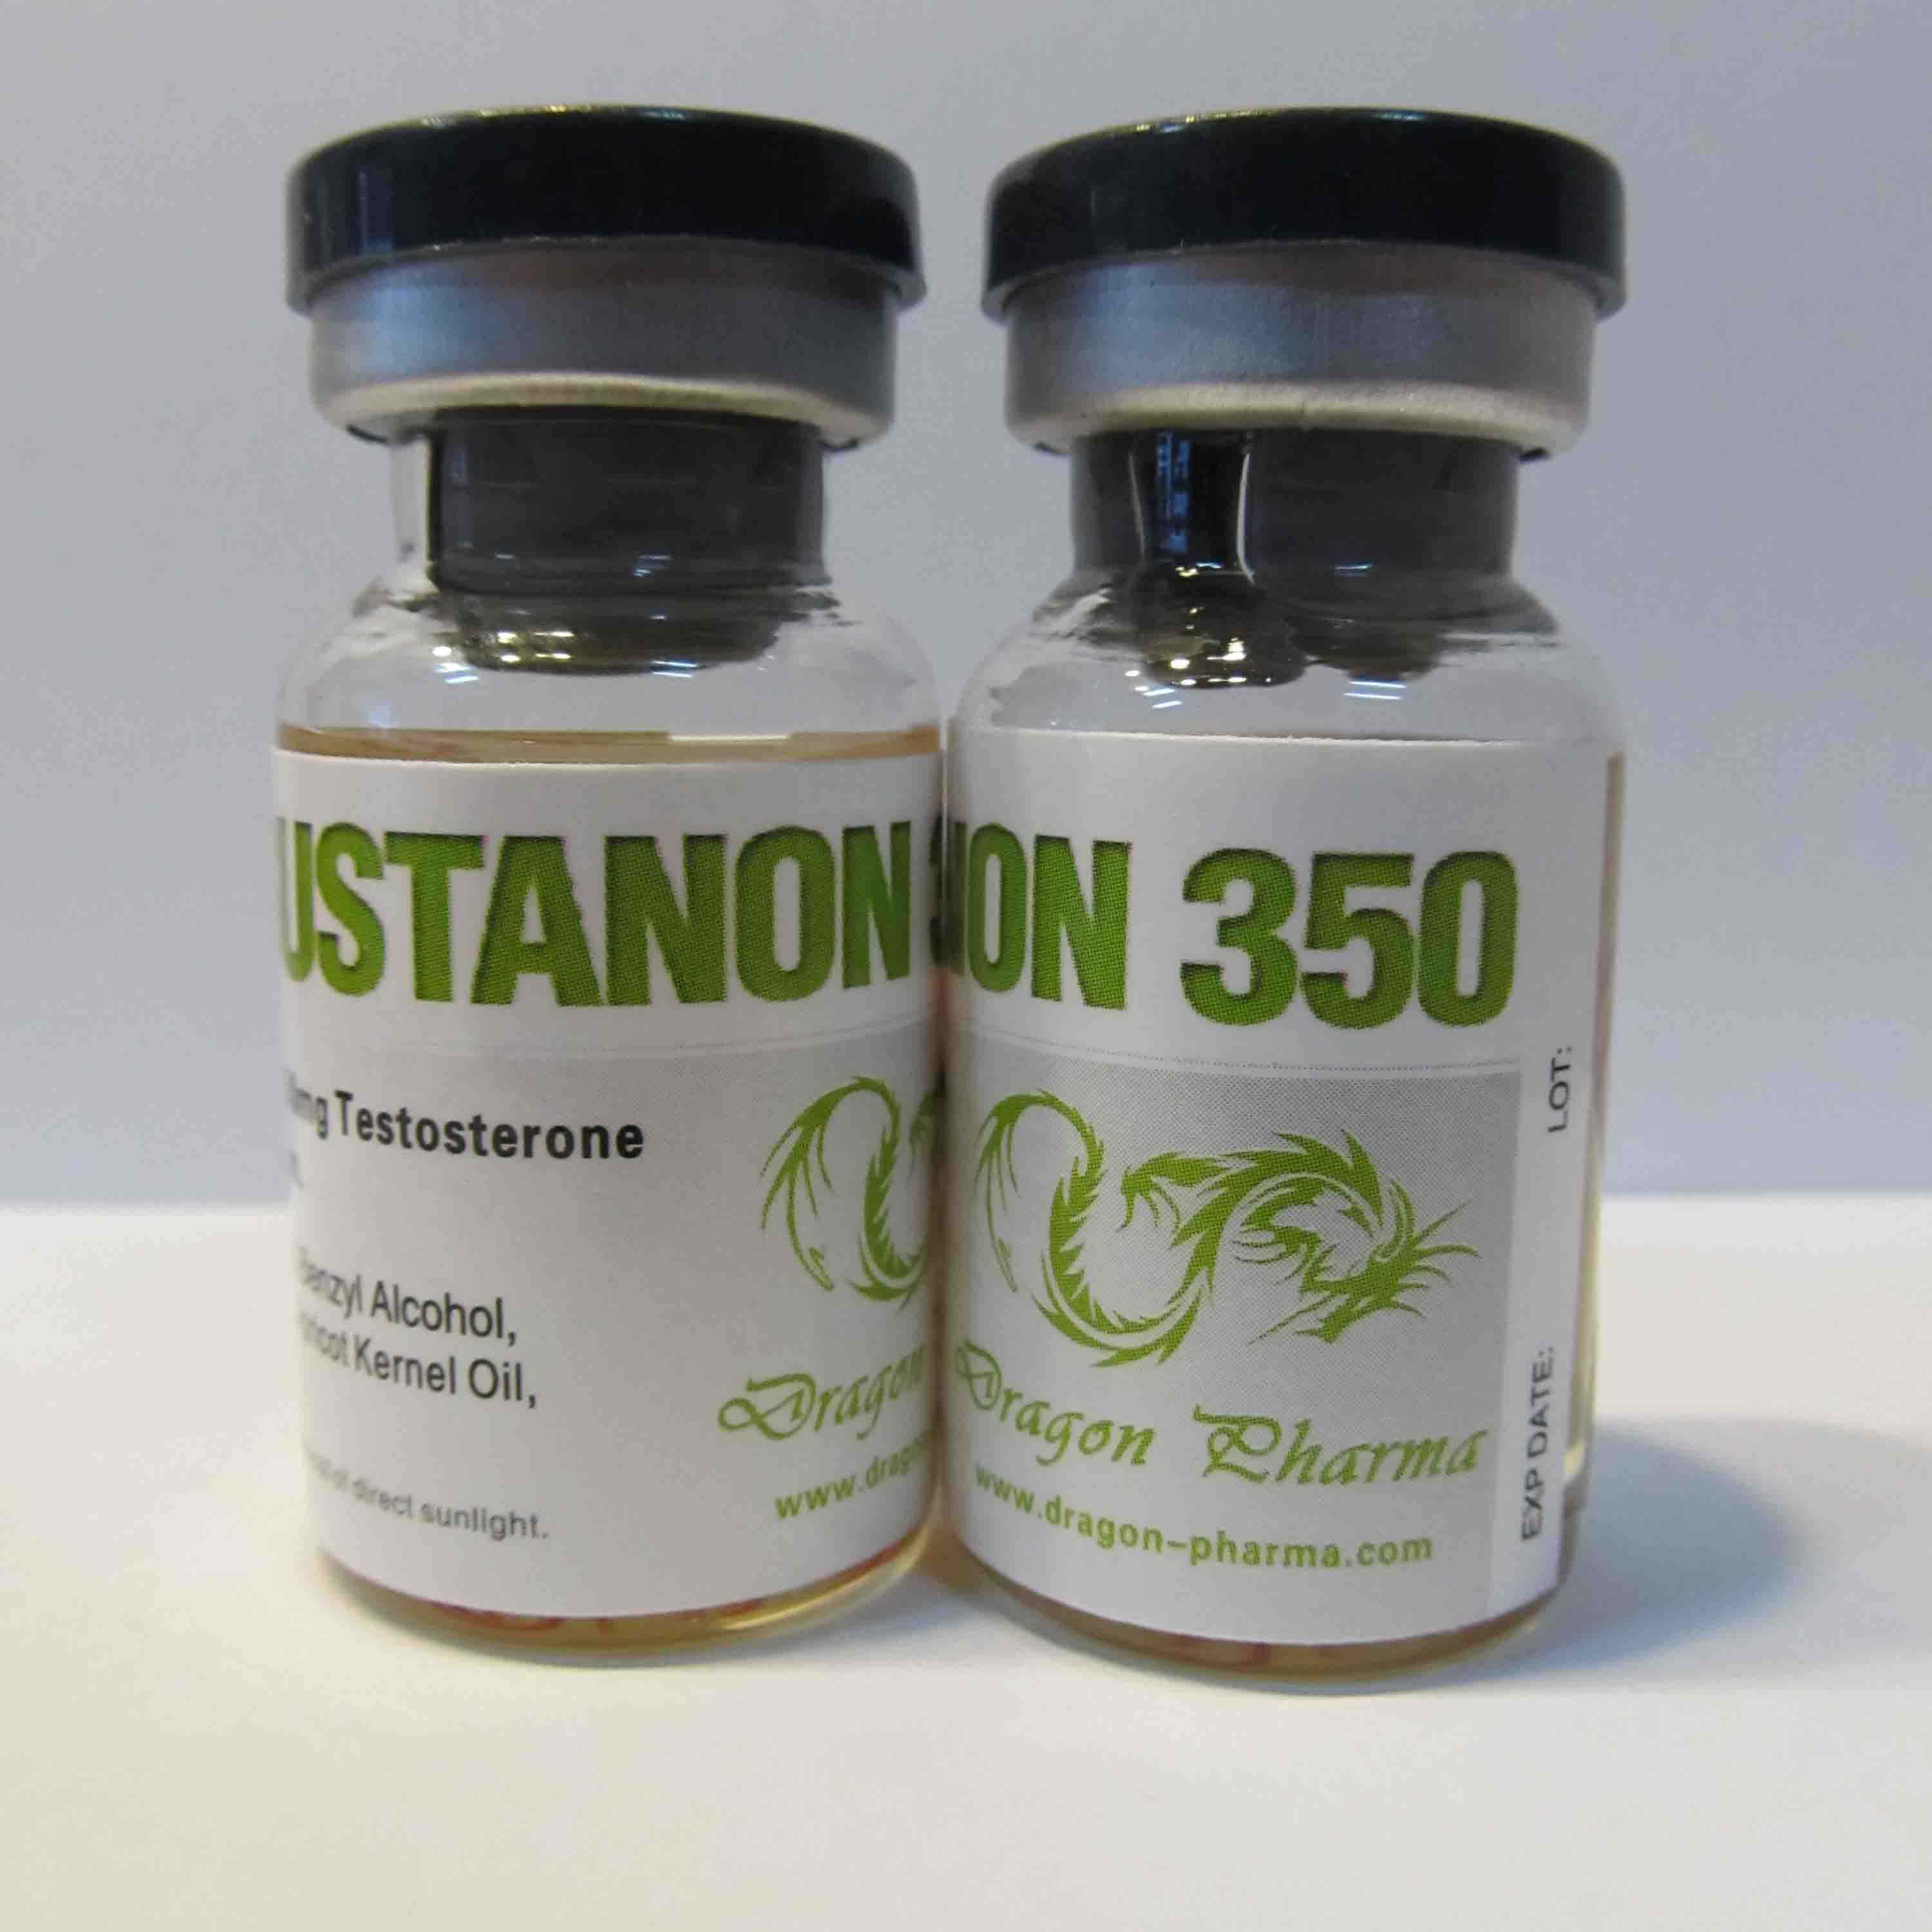 Sustanon 350: Is It Right For Beginners?